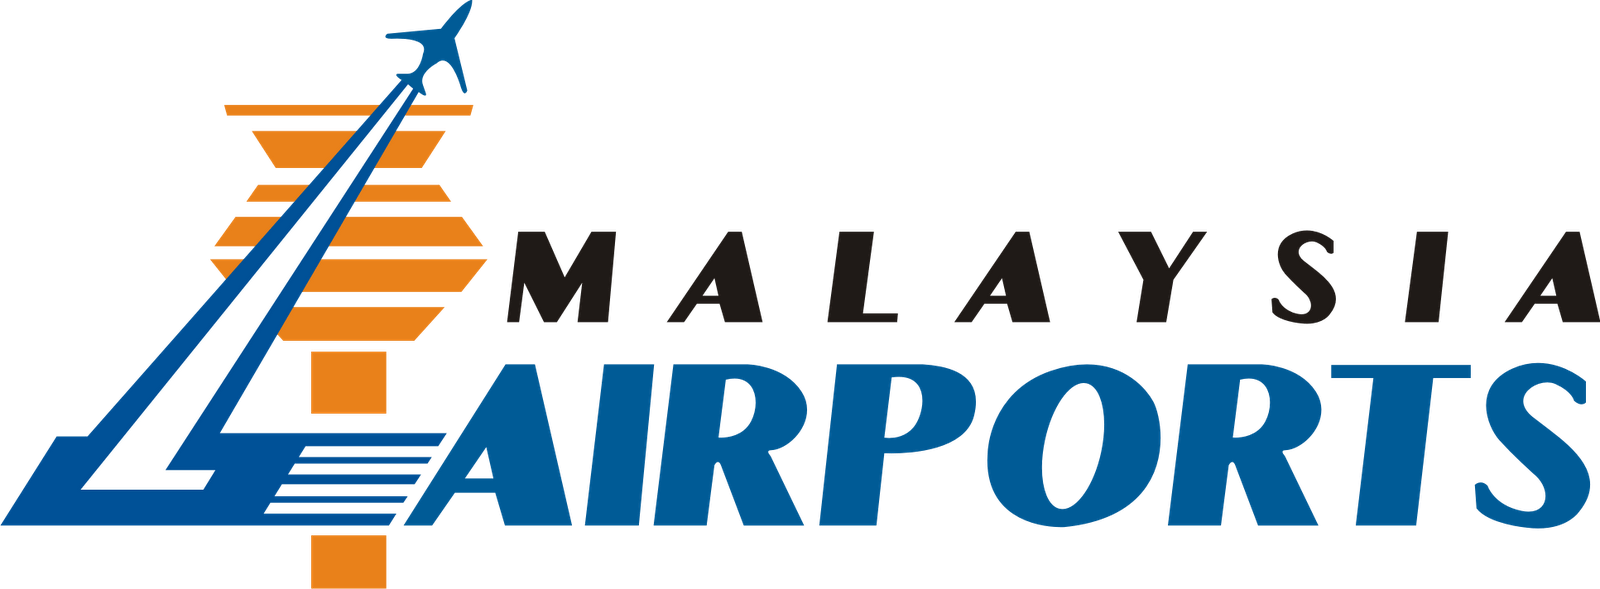 Airports Logo - Malaysia Airports Competitors, Revenue and Employees Company